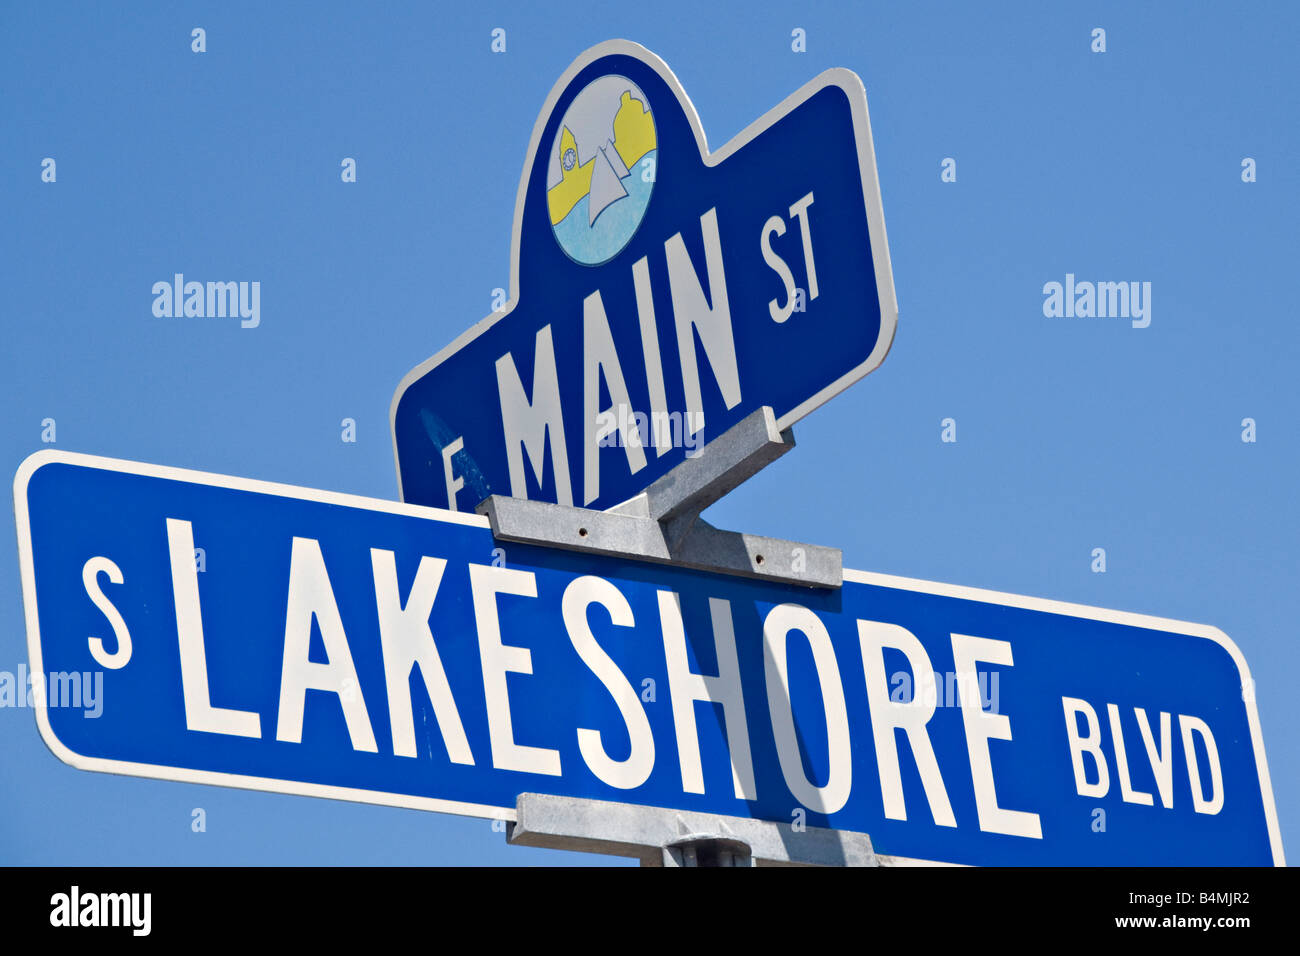 Road sign for intersection of Main Street and Lakeshore Boulevard in downtown Marquette Michigan Stock Photo